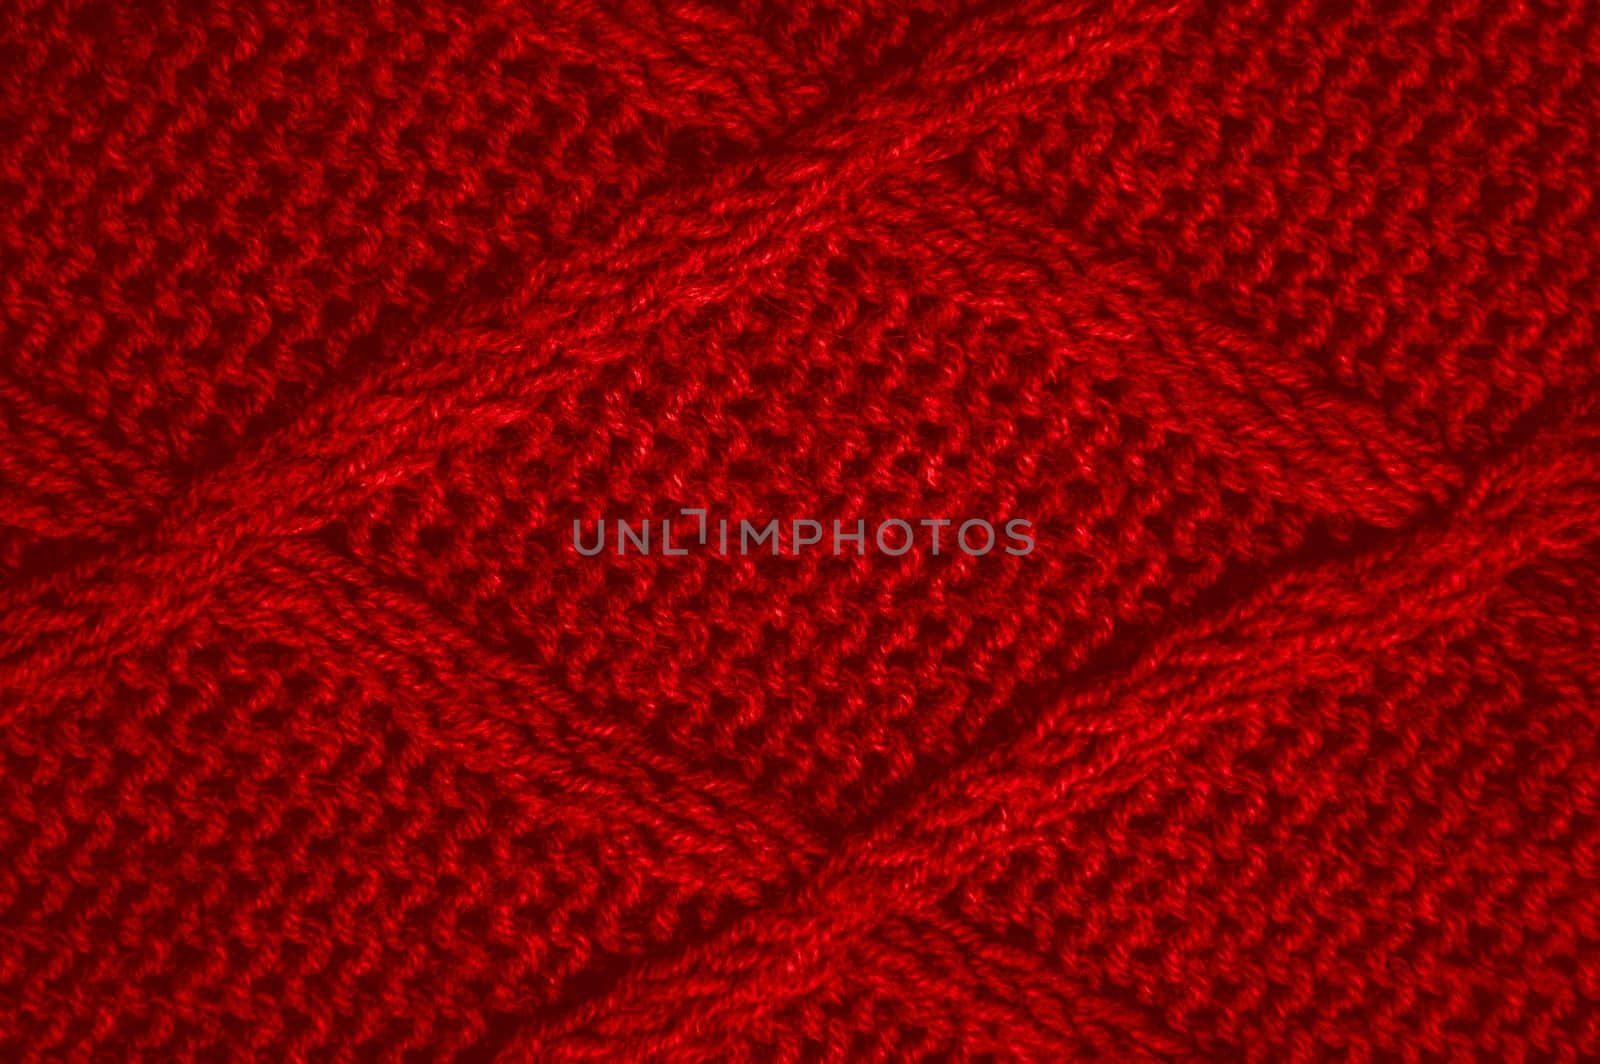 Linen Knitted Wool. Vintage Woven Pullover. Cotton Knitwear Christmas Background. Weave Knitted Fabric. Red Closeup Thread. Nordic Holiday Canvas. Fiber Scarf Garment. Abstract Wool.